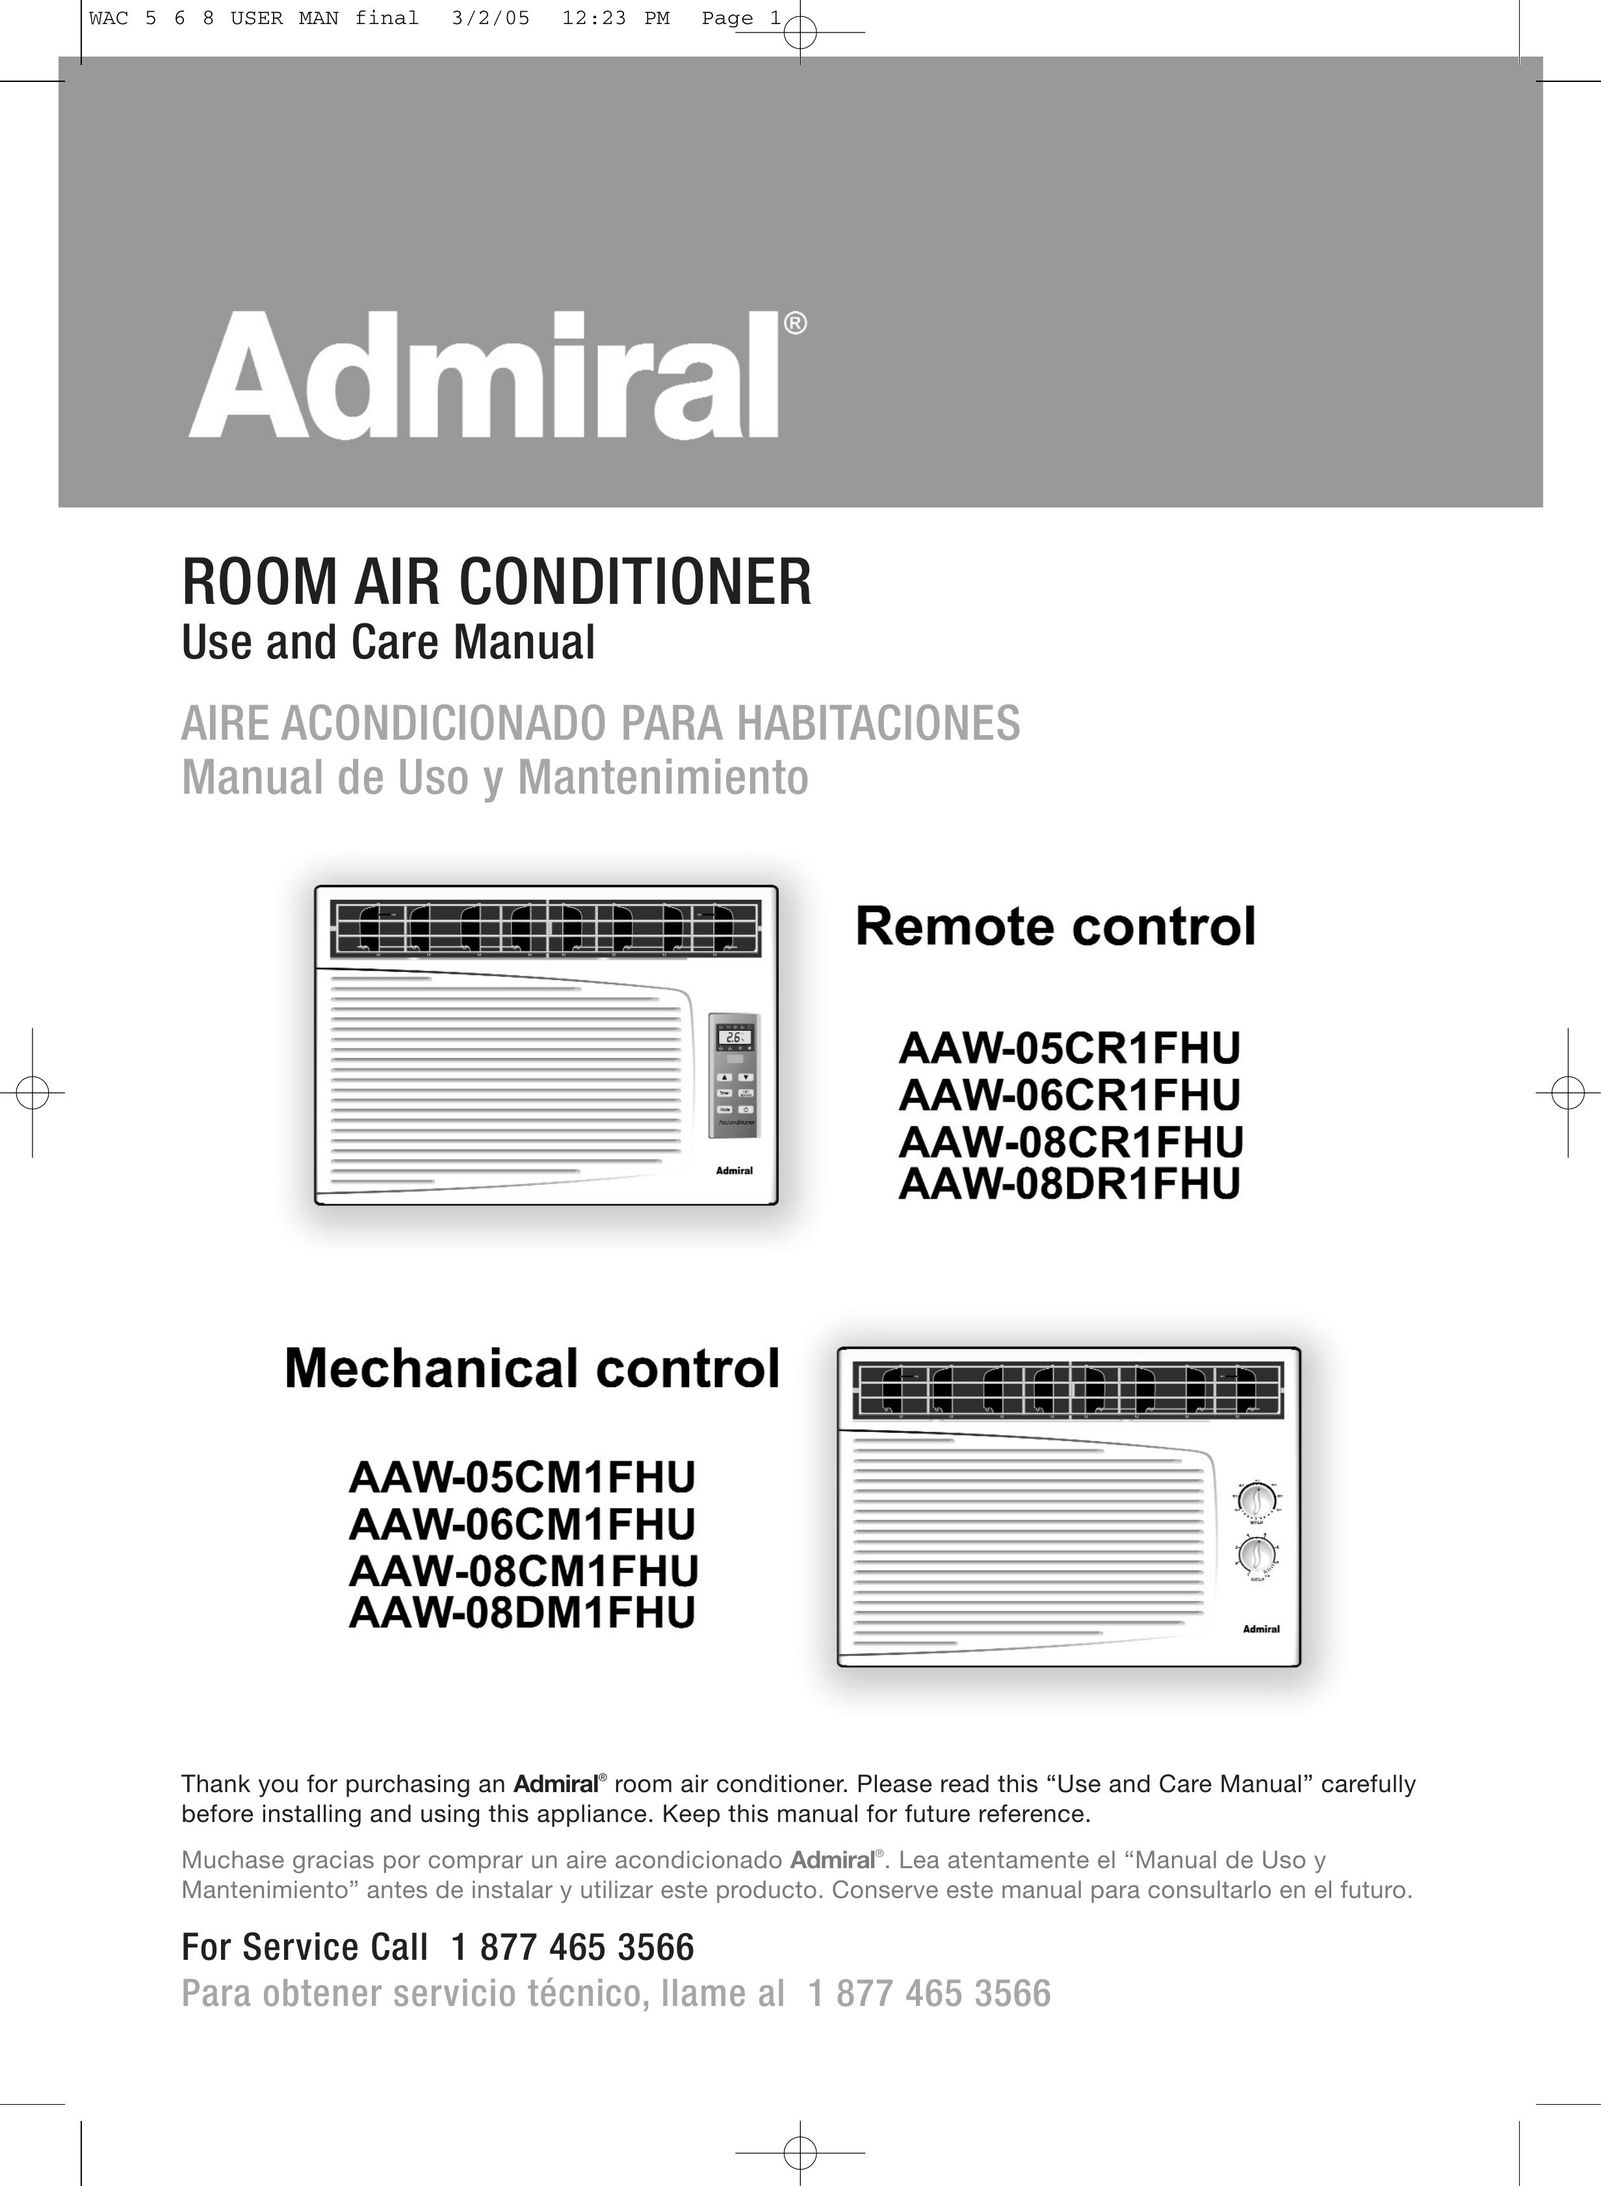 Admiral AAW-08DR1FHU Air Conditioner User Manual